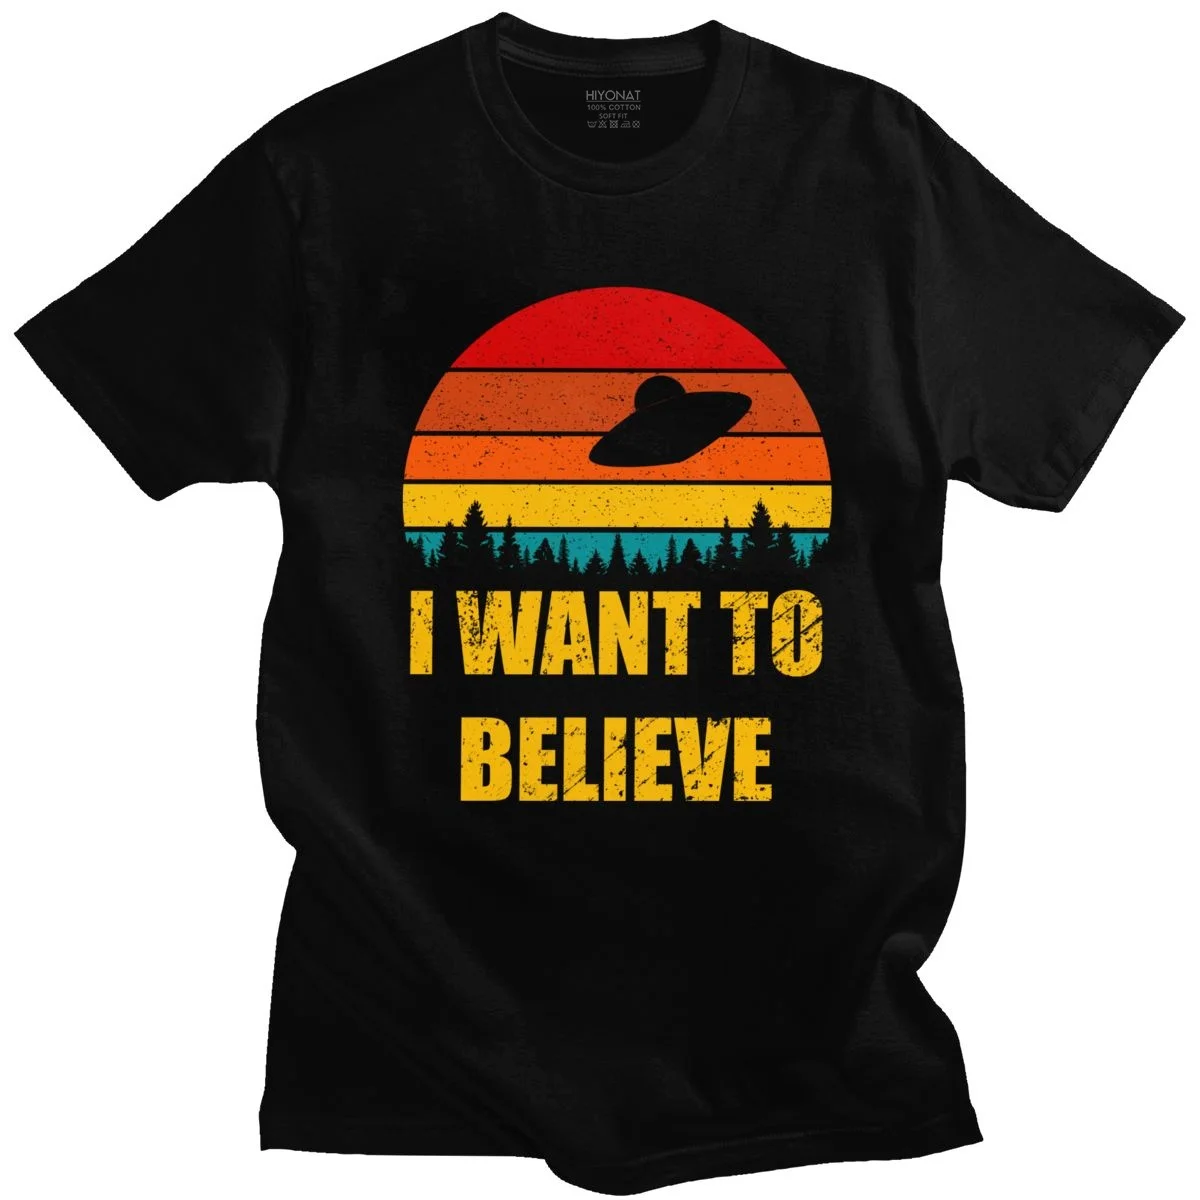 

Vintage The X Files I Want To Believe T Shirt for Men Short Sleeve Aliens UFO Area 51 Tee Tops O-neck Cotton T-Shirt Clothing